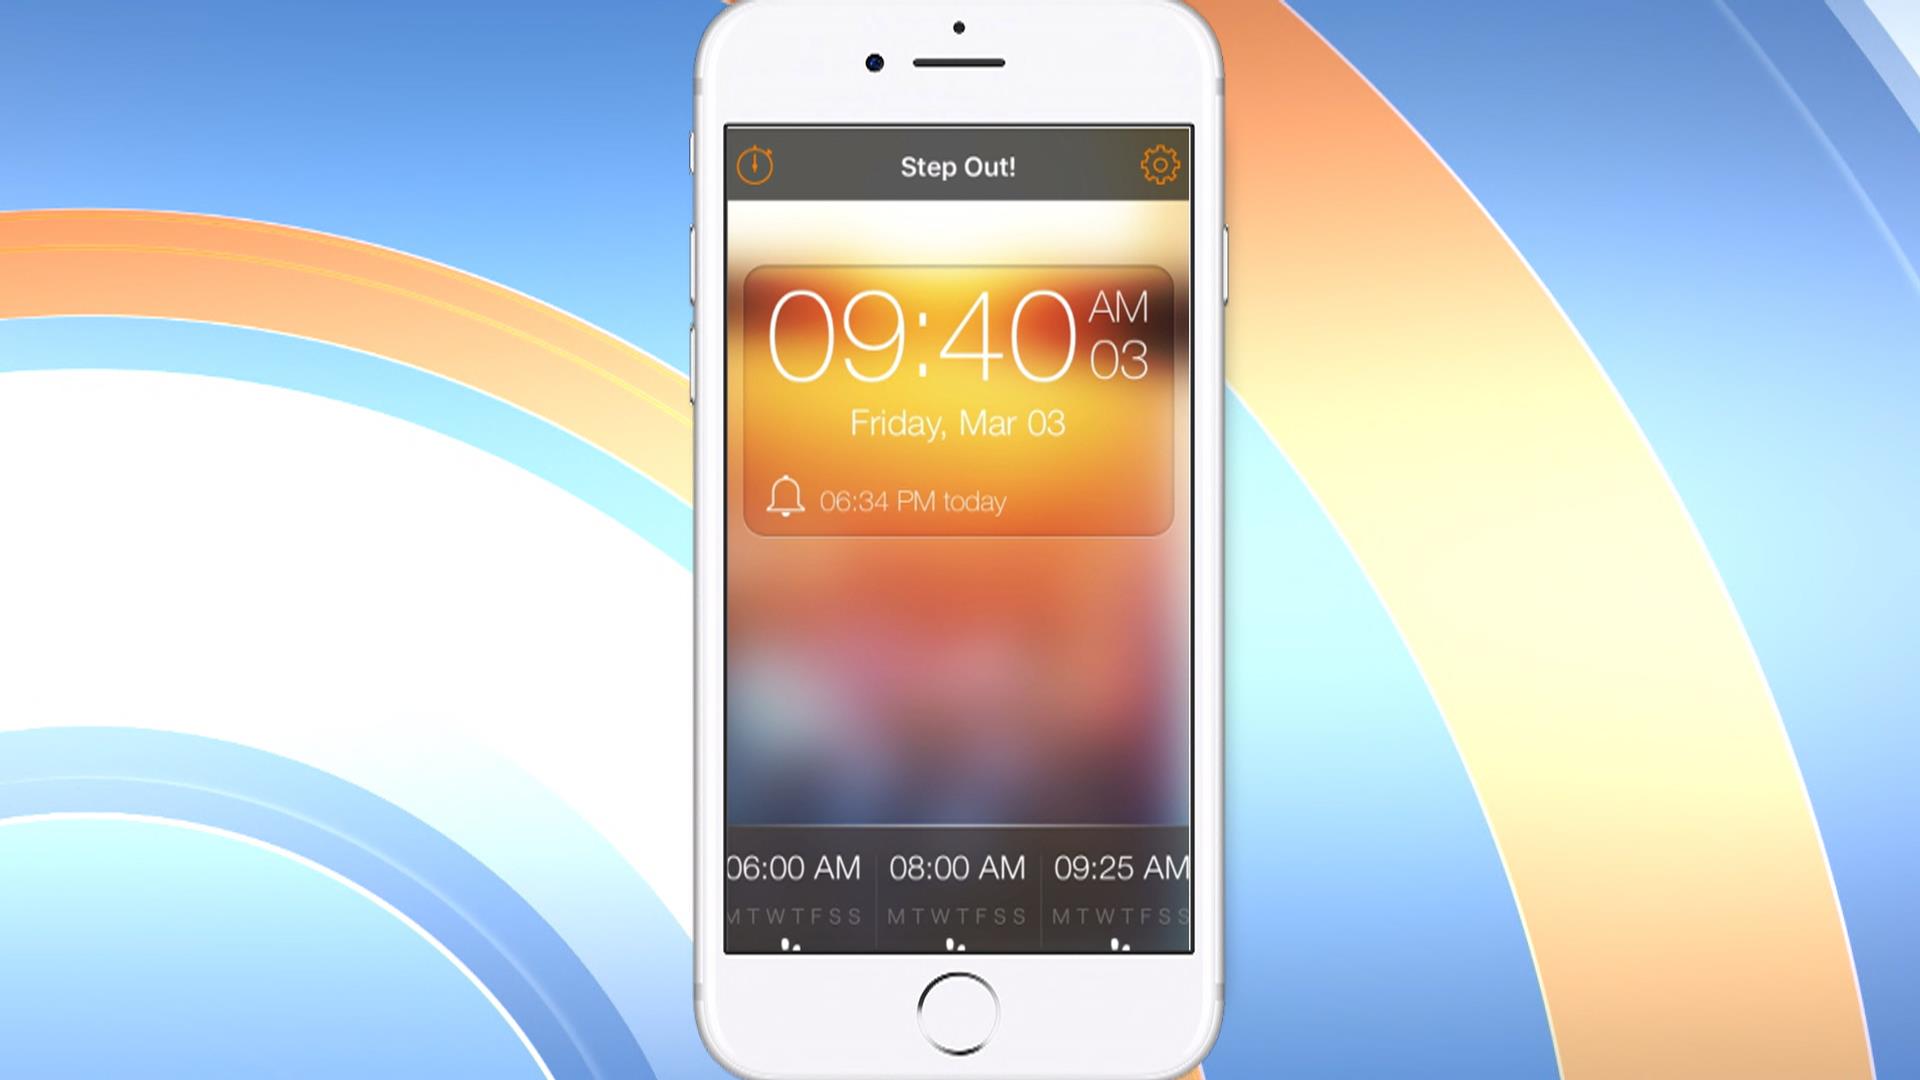 This alarm MAKES you get up: Hacks to save time in the morning